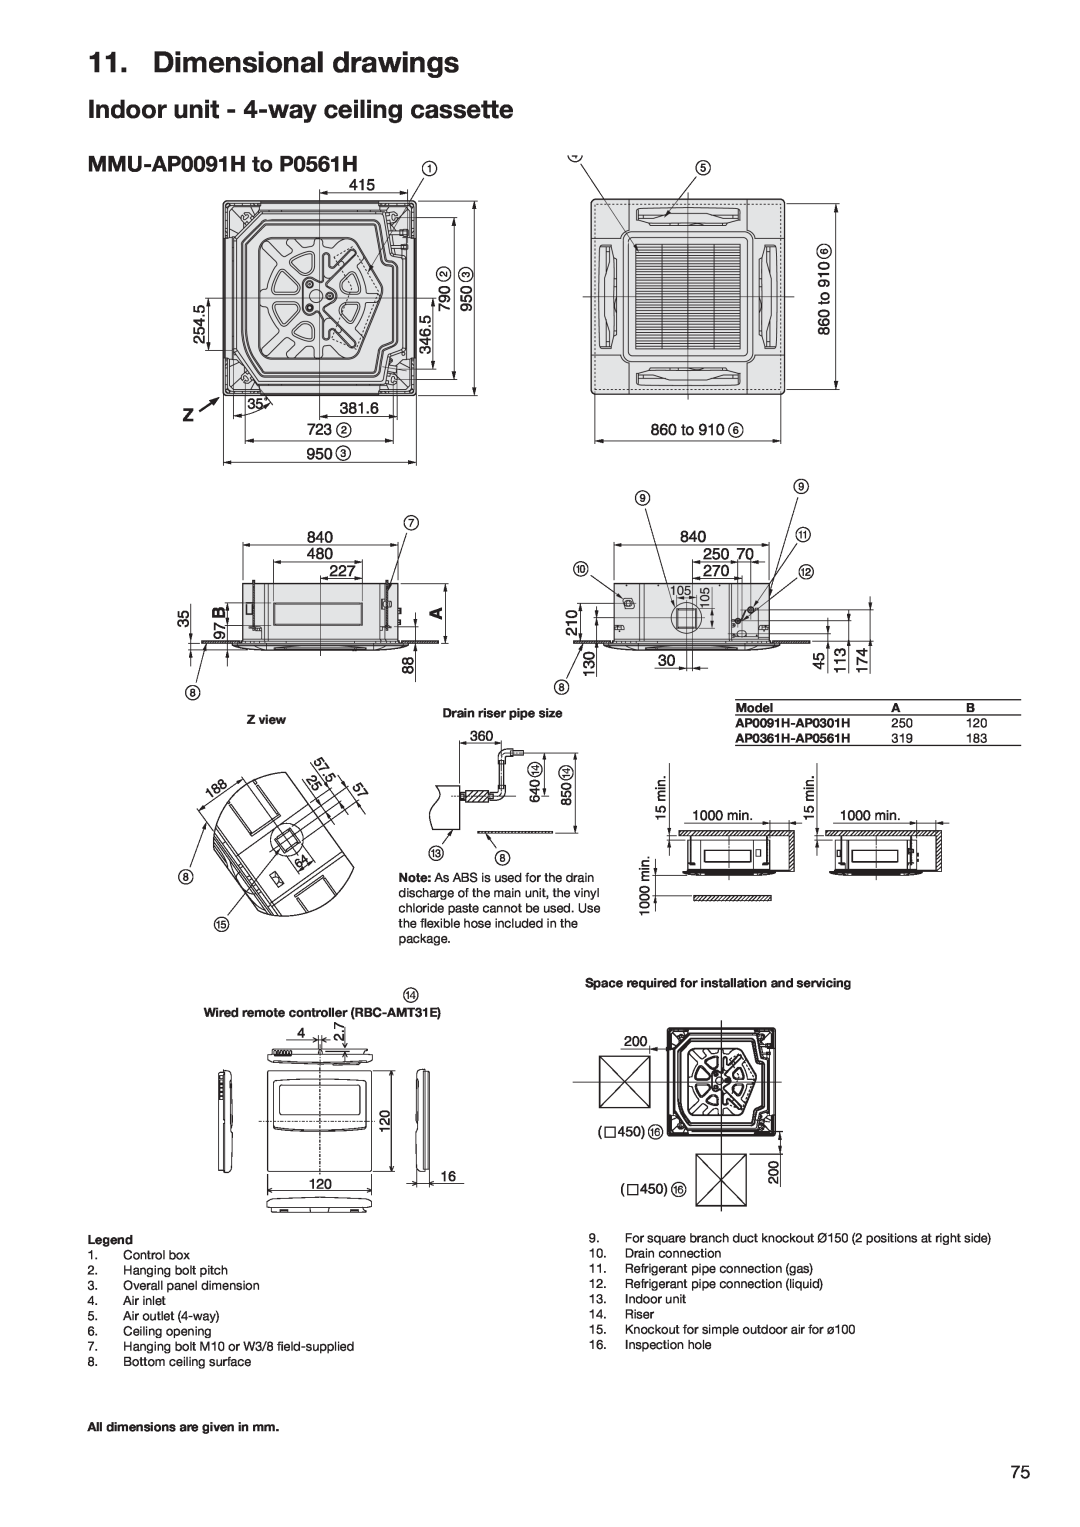 Toshiba HFC R-410A manual Dimensional drawings, Indoor unit - 4-wayceiling cassette, MMU-AP0091Hto P0561H 